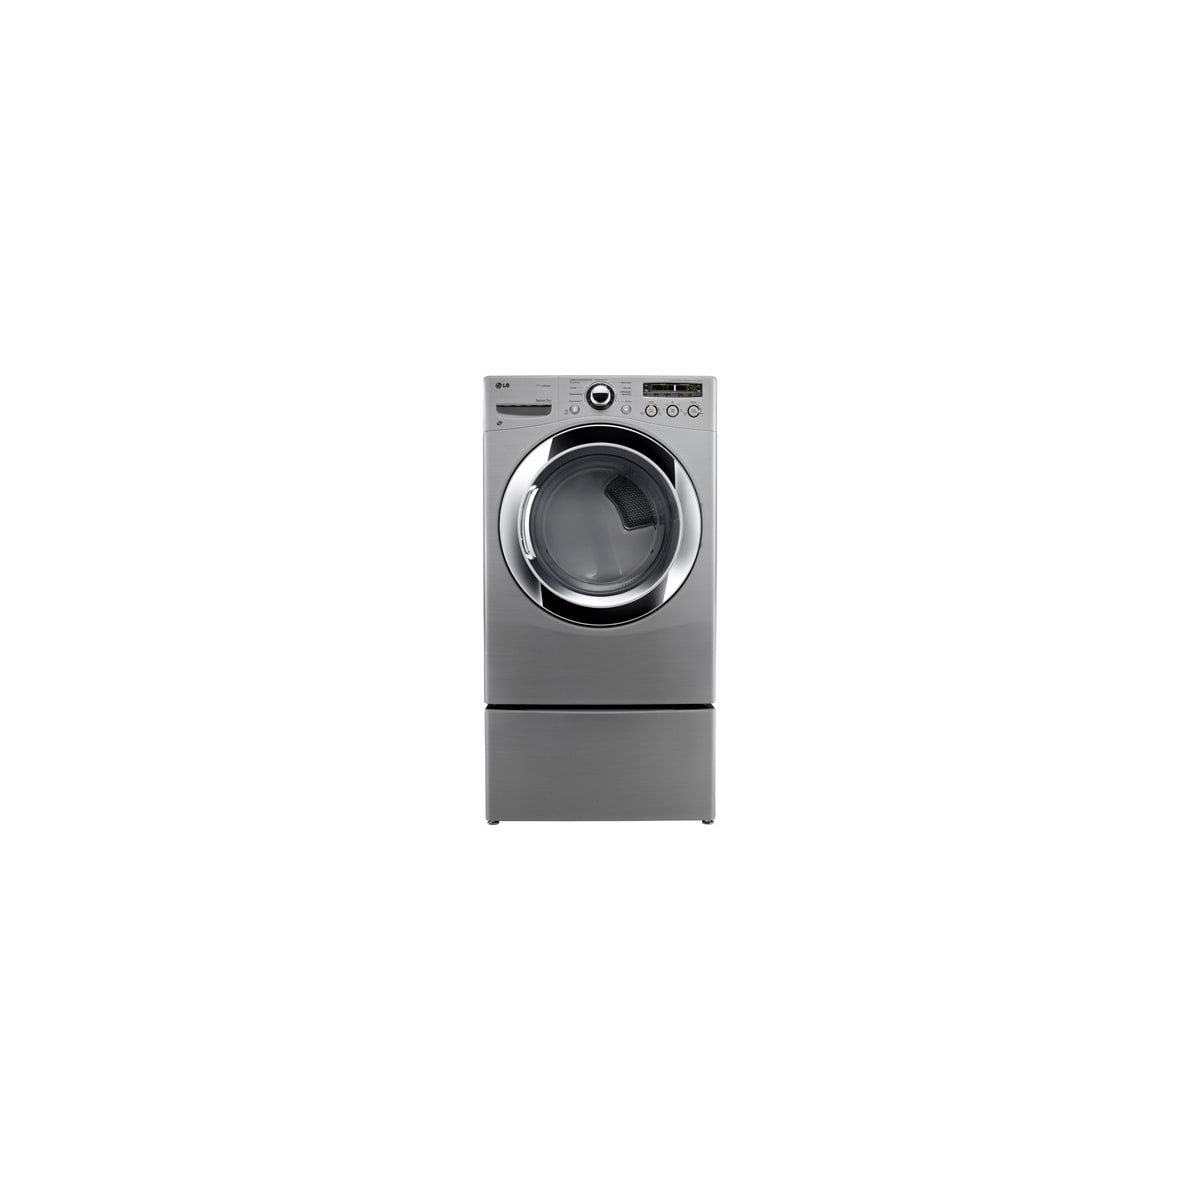 LG DLEX3250W 27 Inch Front-Load Electric Dryer with 7.3 cu. ft. Capacity, 9  Dry Cycles, 10 Options, Wrinkle Care Option, TrueSteam Technology, Sensor  Dry and Drying Rack: White